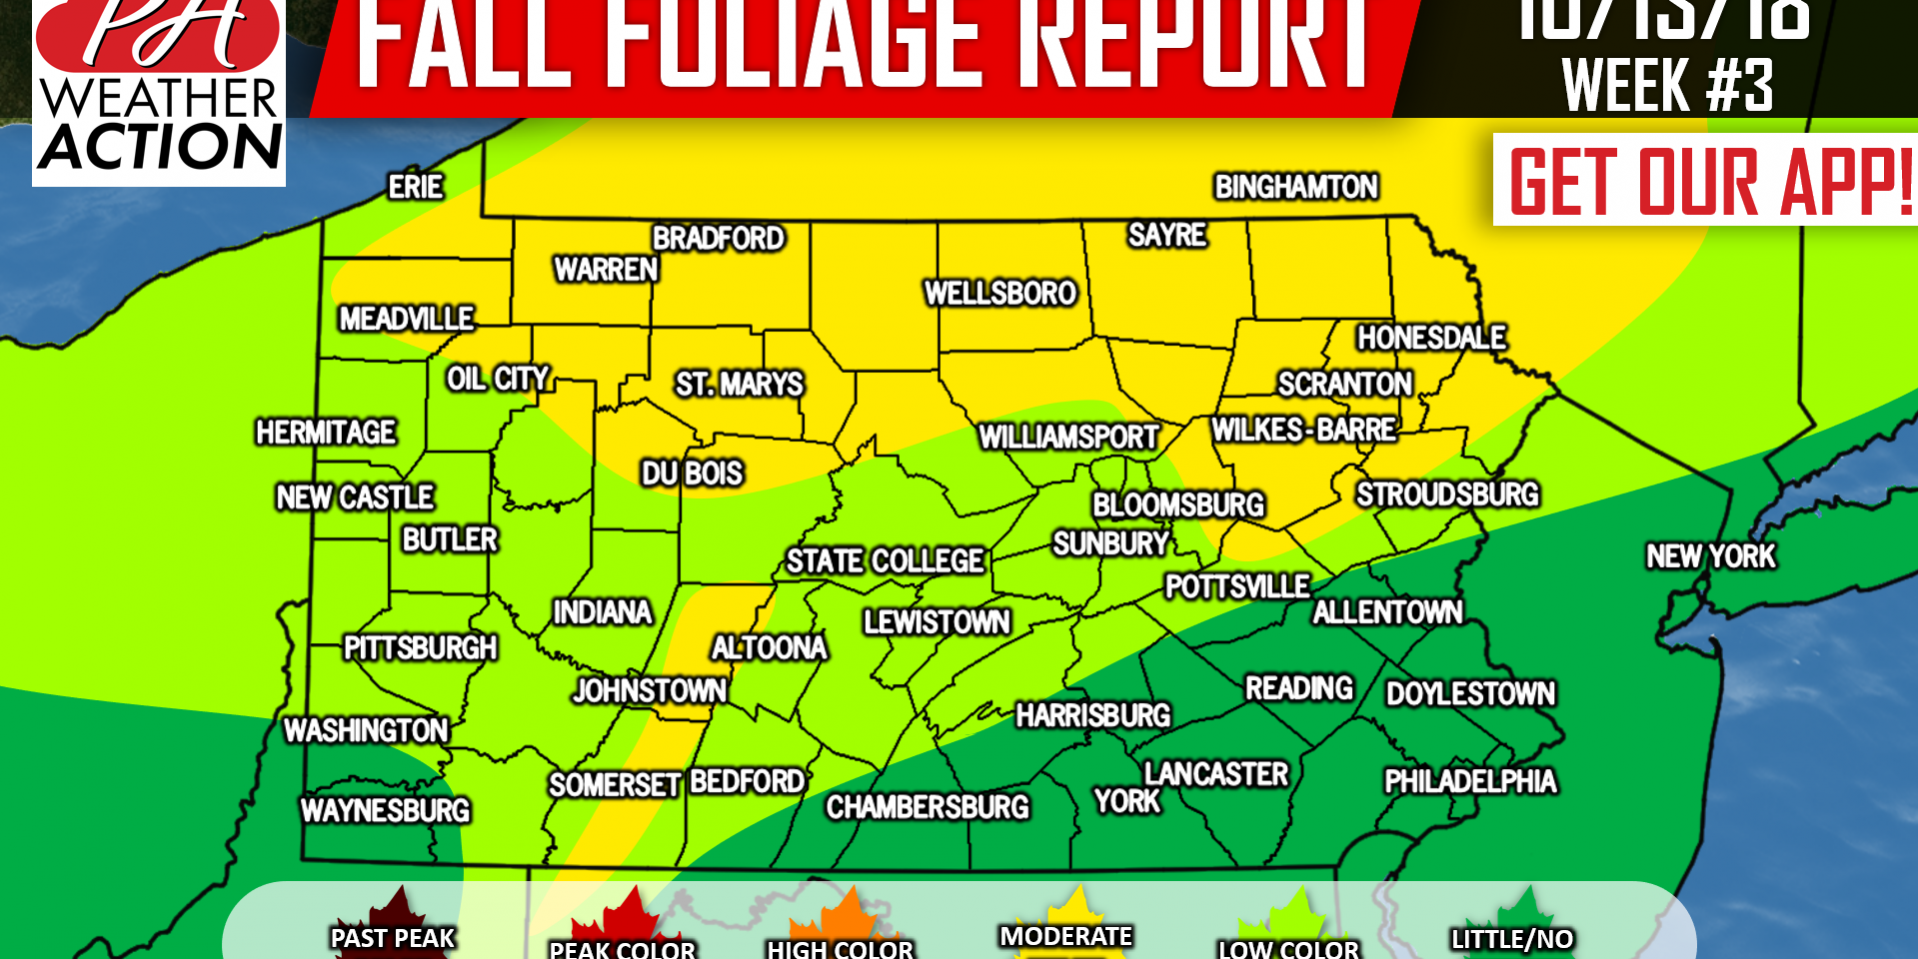 Fall Foliage Report October 13th 2018 Pa Weather Action